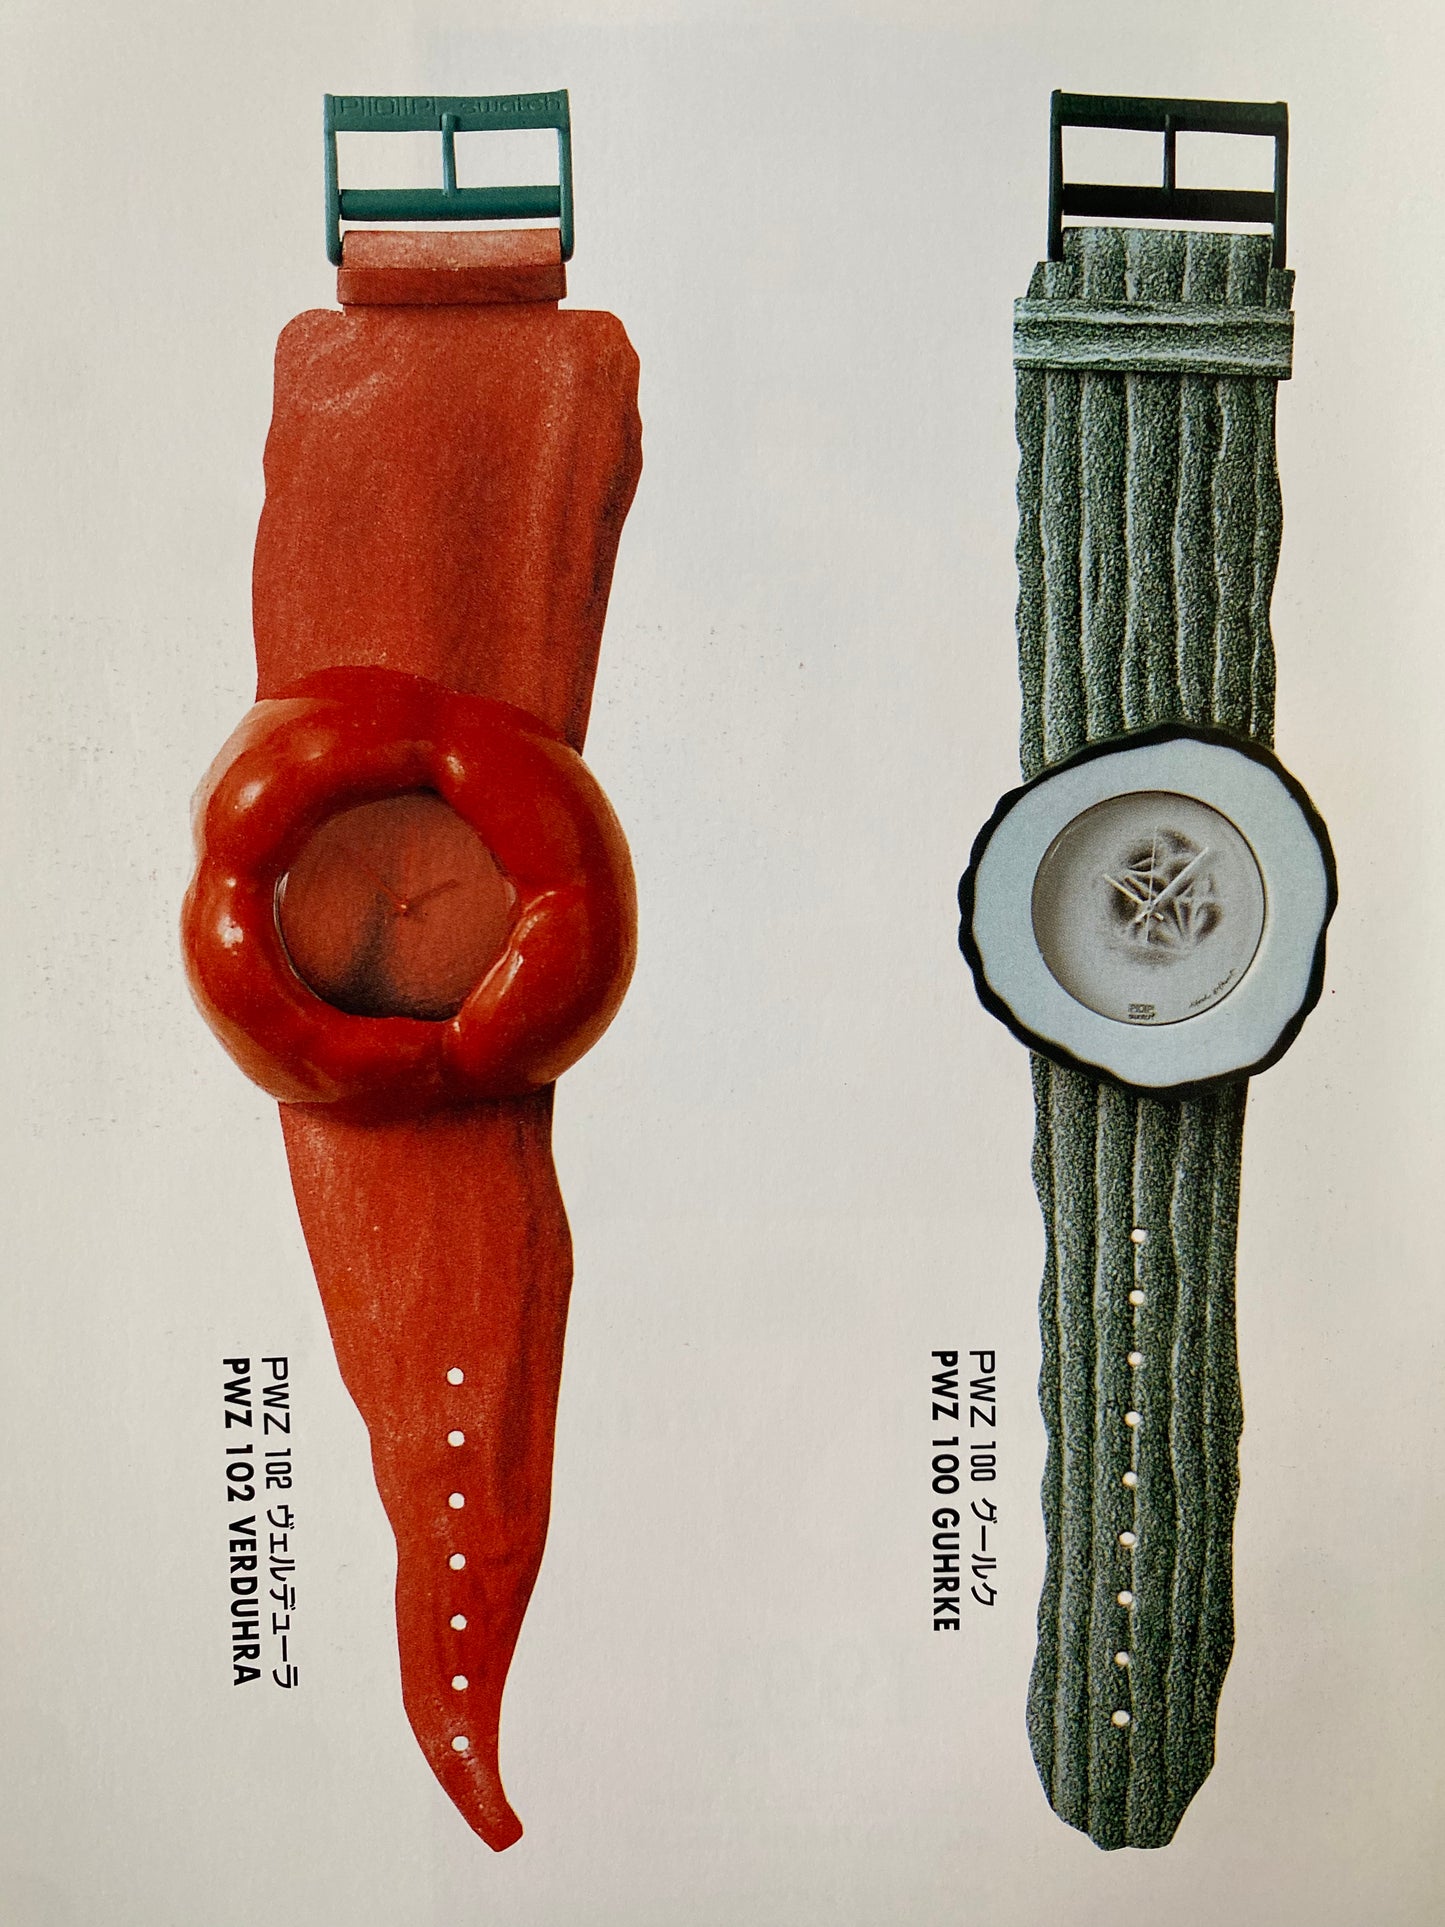 Swatch Collection - Japanese Swatch Collector's Guide (1992)